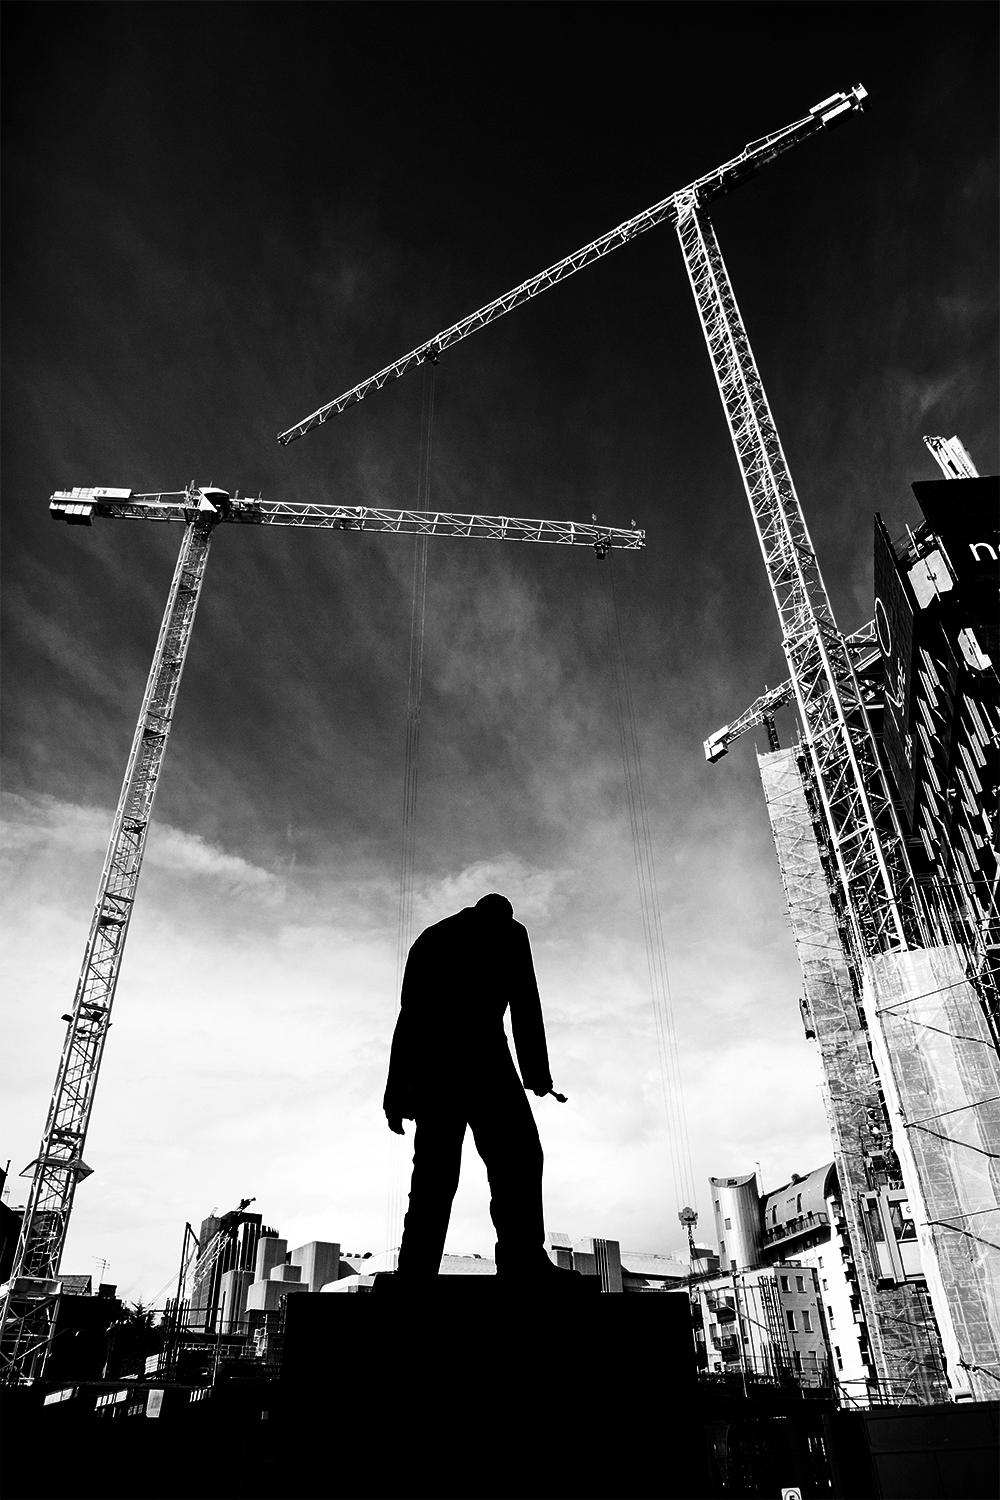 Edition of 25
signed and numbered by the artist

This photo was shot in Berlin. The cranes make the statue looks like a marionette.

JJK is a pseudonym for one of the world's most successful photo artists.
In his series "Always in my mind", he